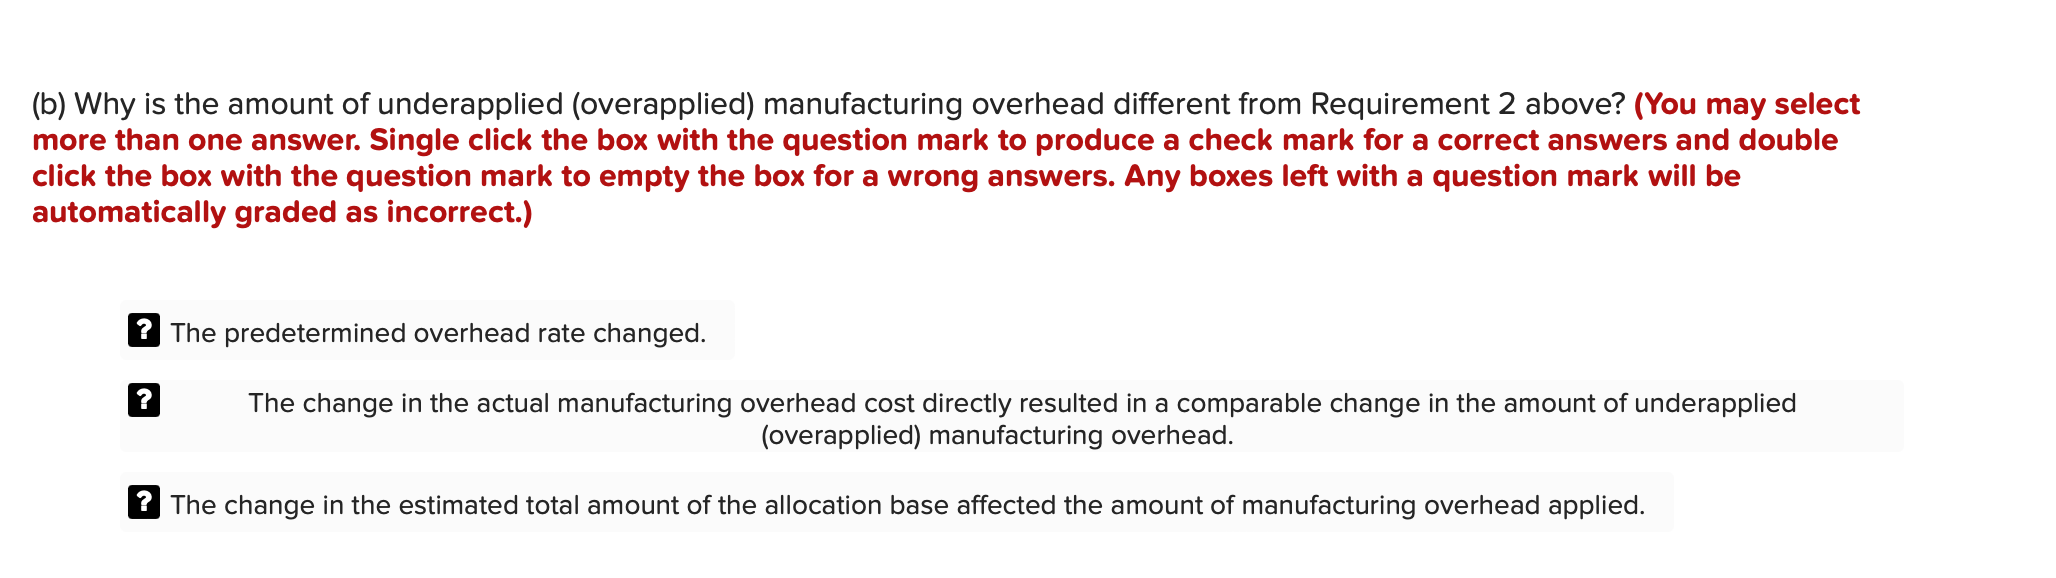 (b) Why is the amount of underapplied (overapplied) manufacturing overhead different from Requirement 2